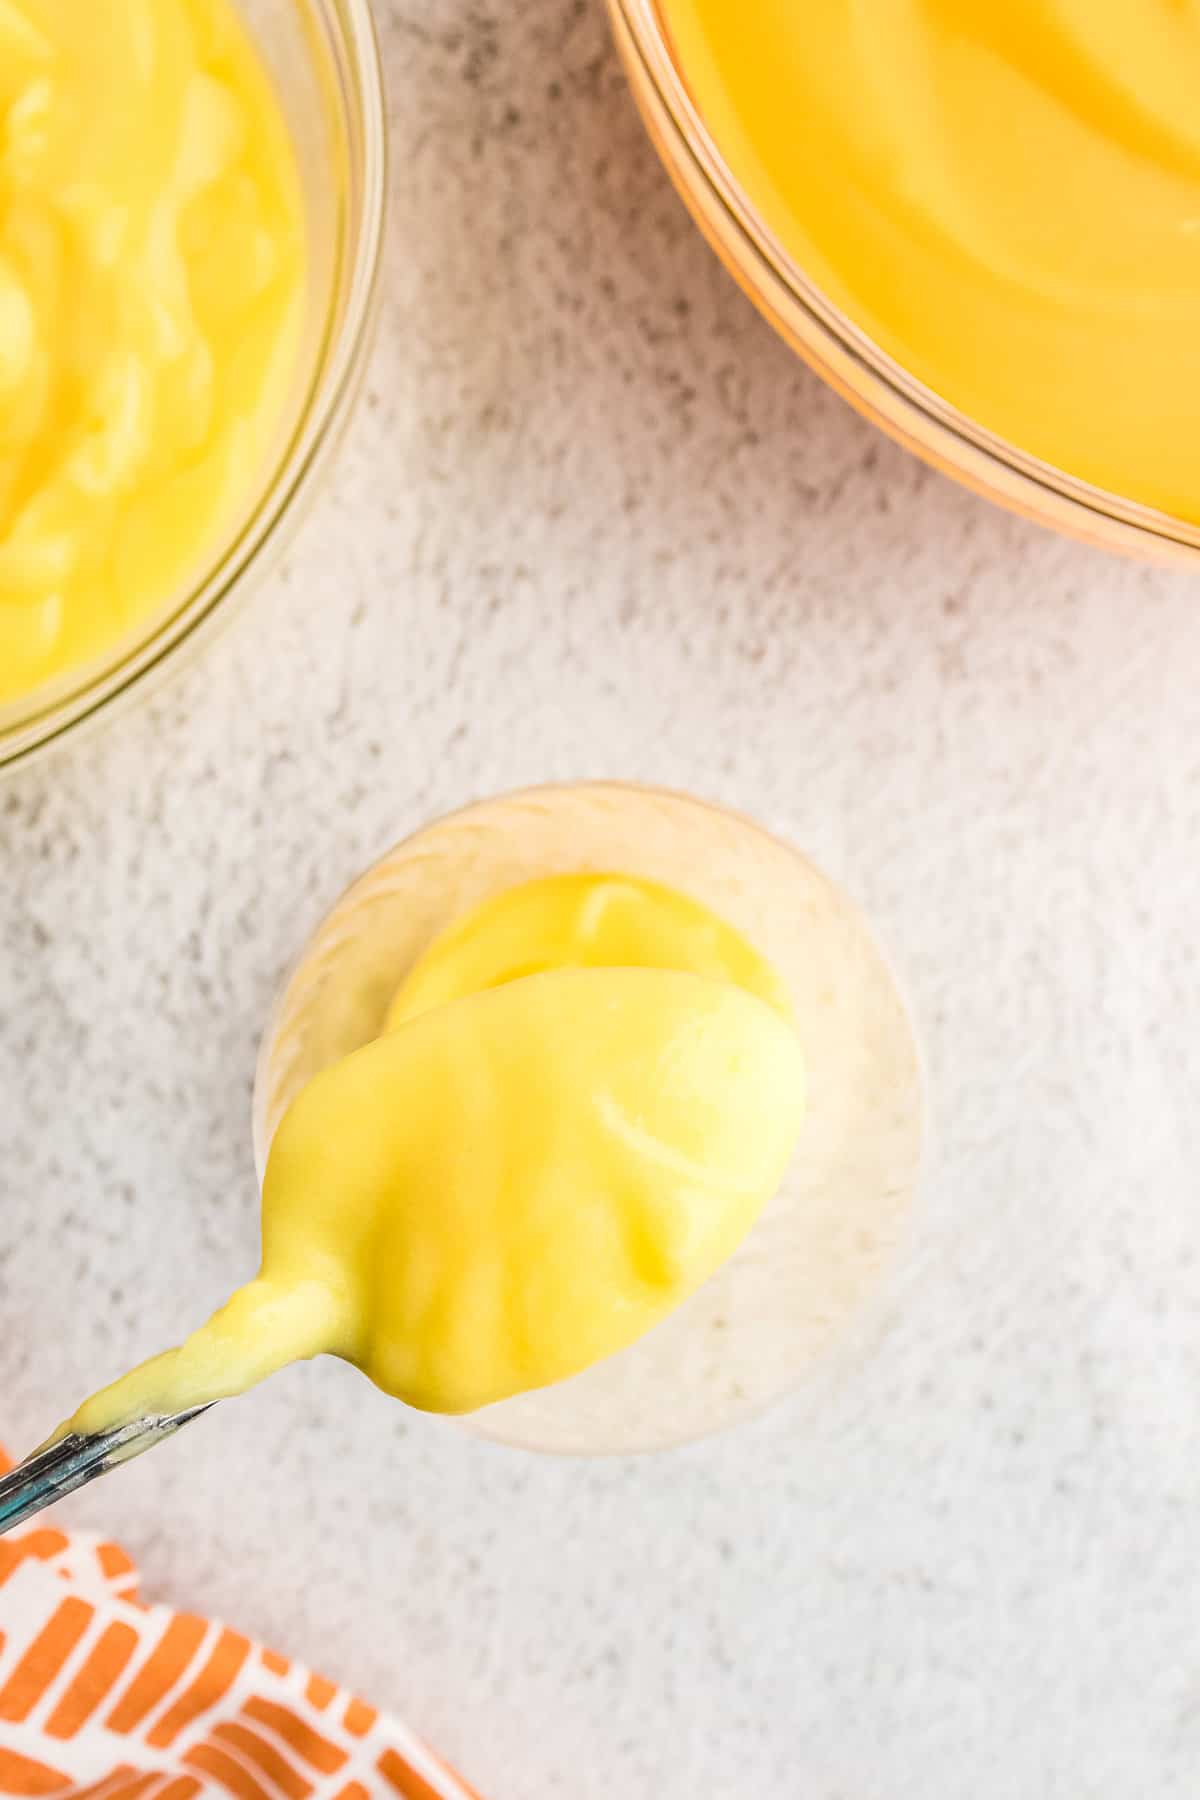 in a Plastic cup add 4 spoonfuls of normal yellow pudding for the bottom layer.